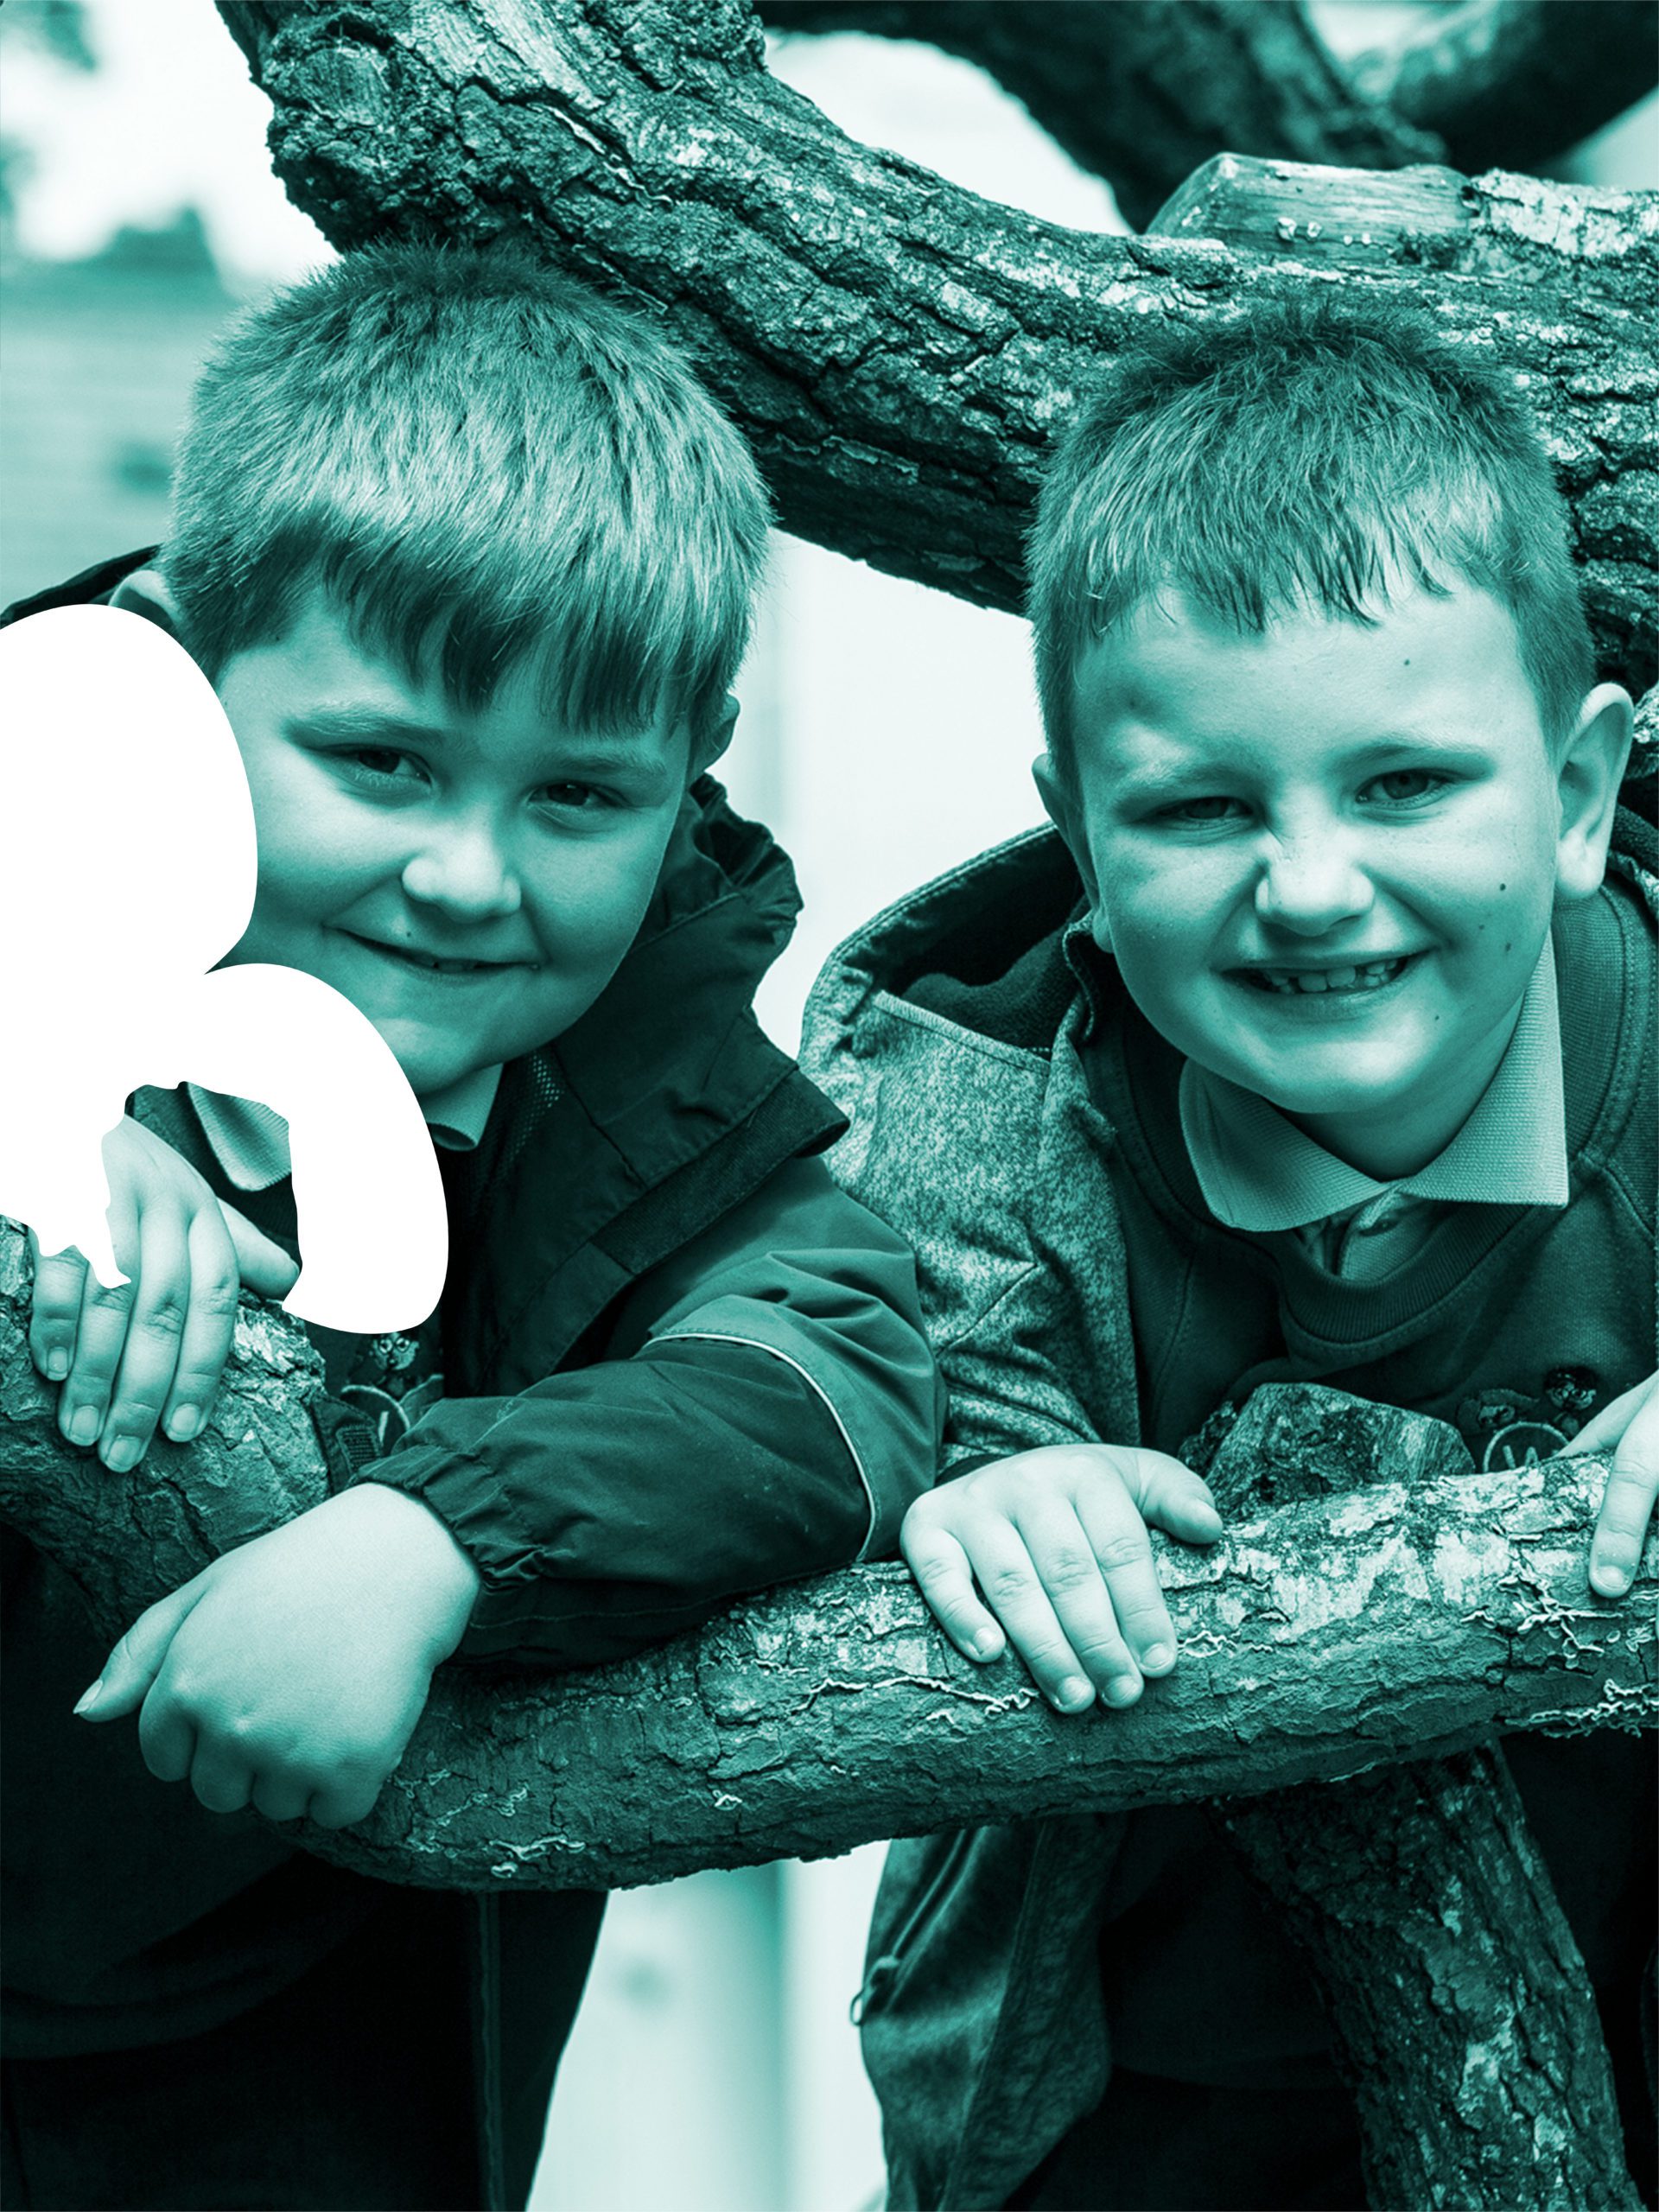 Two young boys smiling at the camera next to the tree with green filter